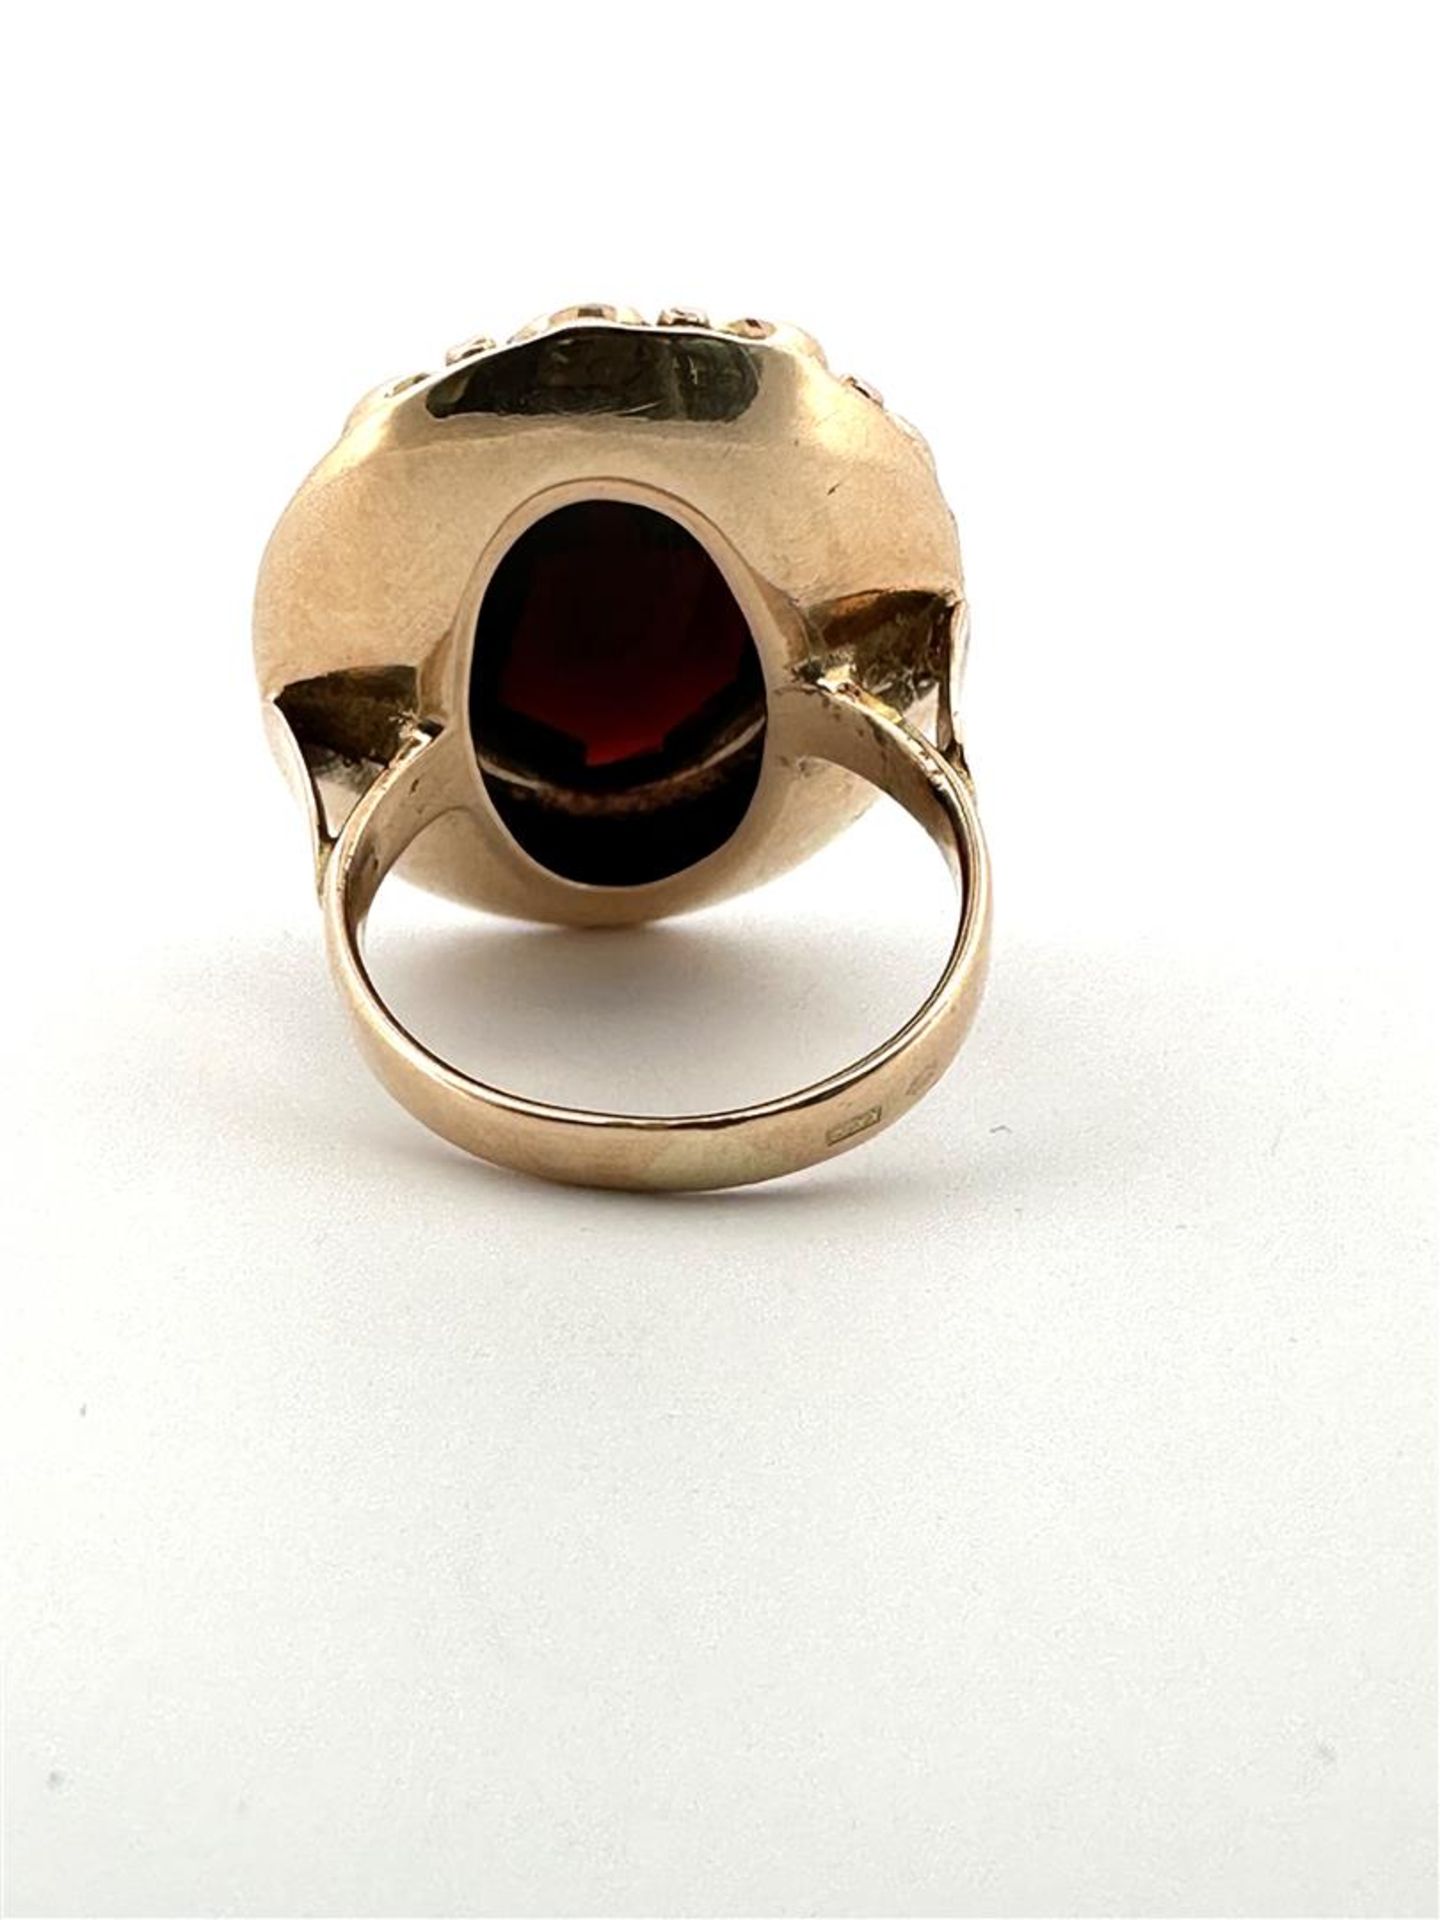 14kt yellow gold cocktail ring set with garnet.
The ring is set with 1 oval rose cut garnet measurin - Bild 5 aus 5